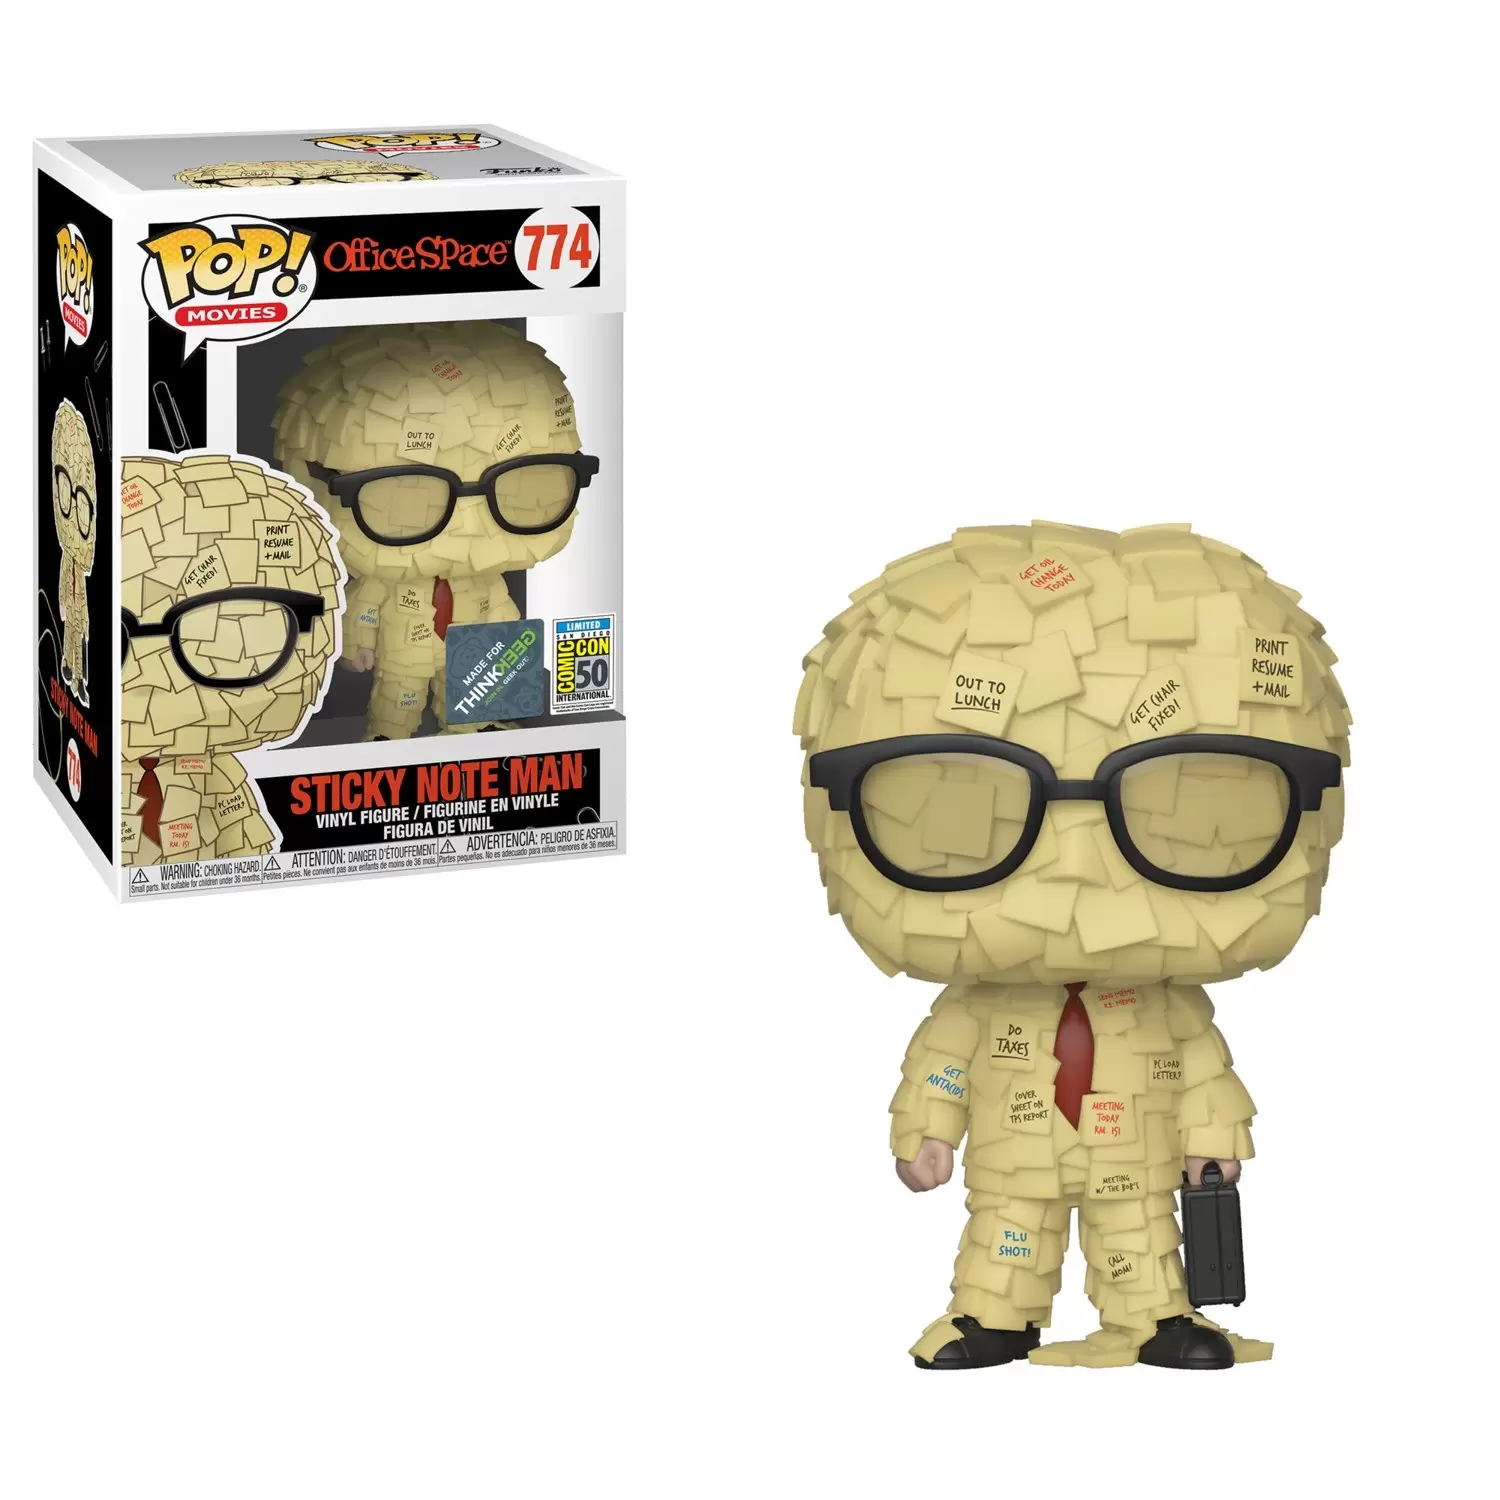 POP! Movies - Office Space - Sticky Note Man